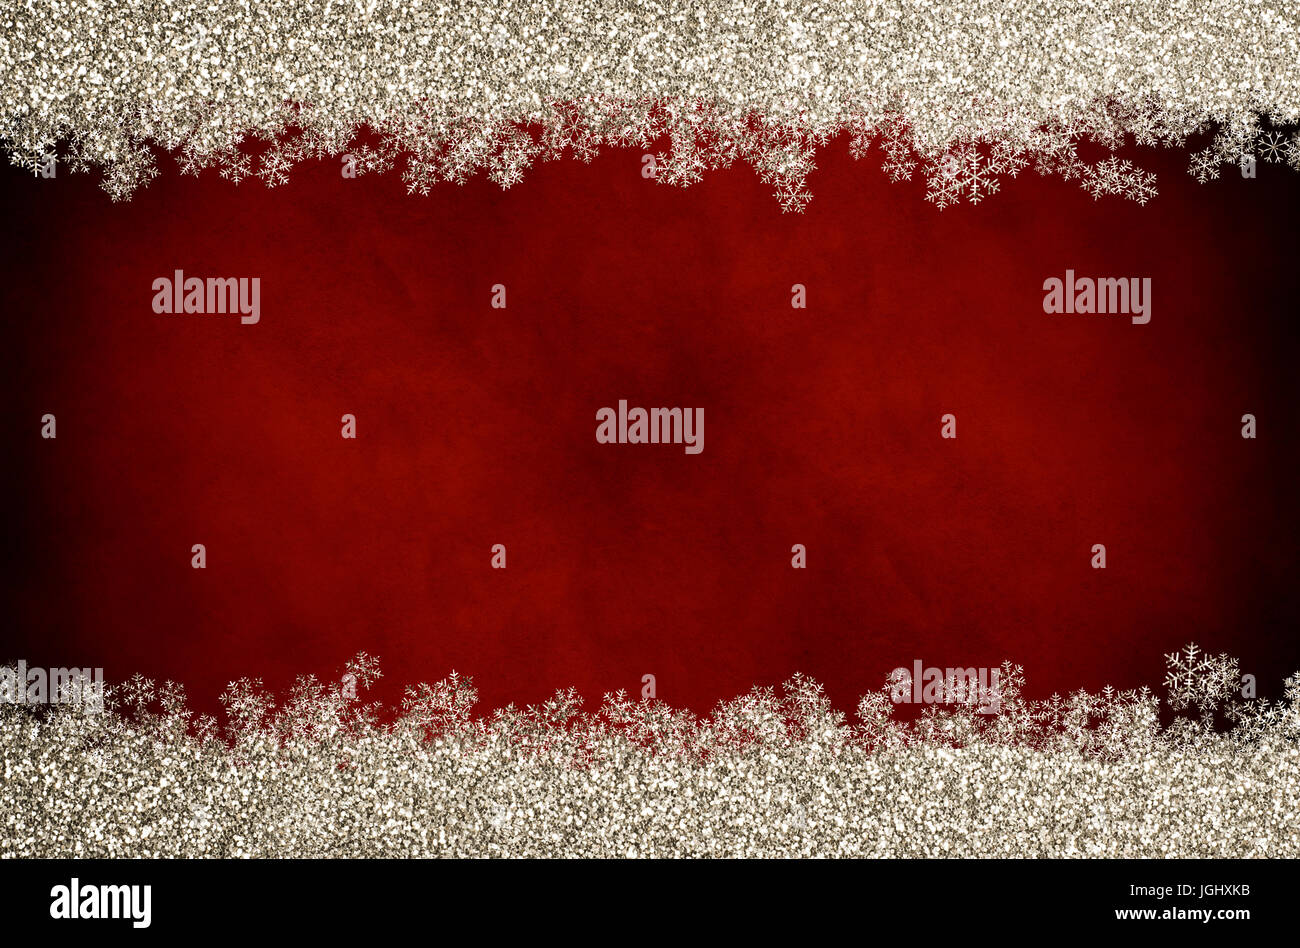 Chriistmas background of dark red vintage parchment with top and bottom border of sparkly gold glitter with glittery snowflakes. Stock Photo